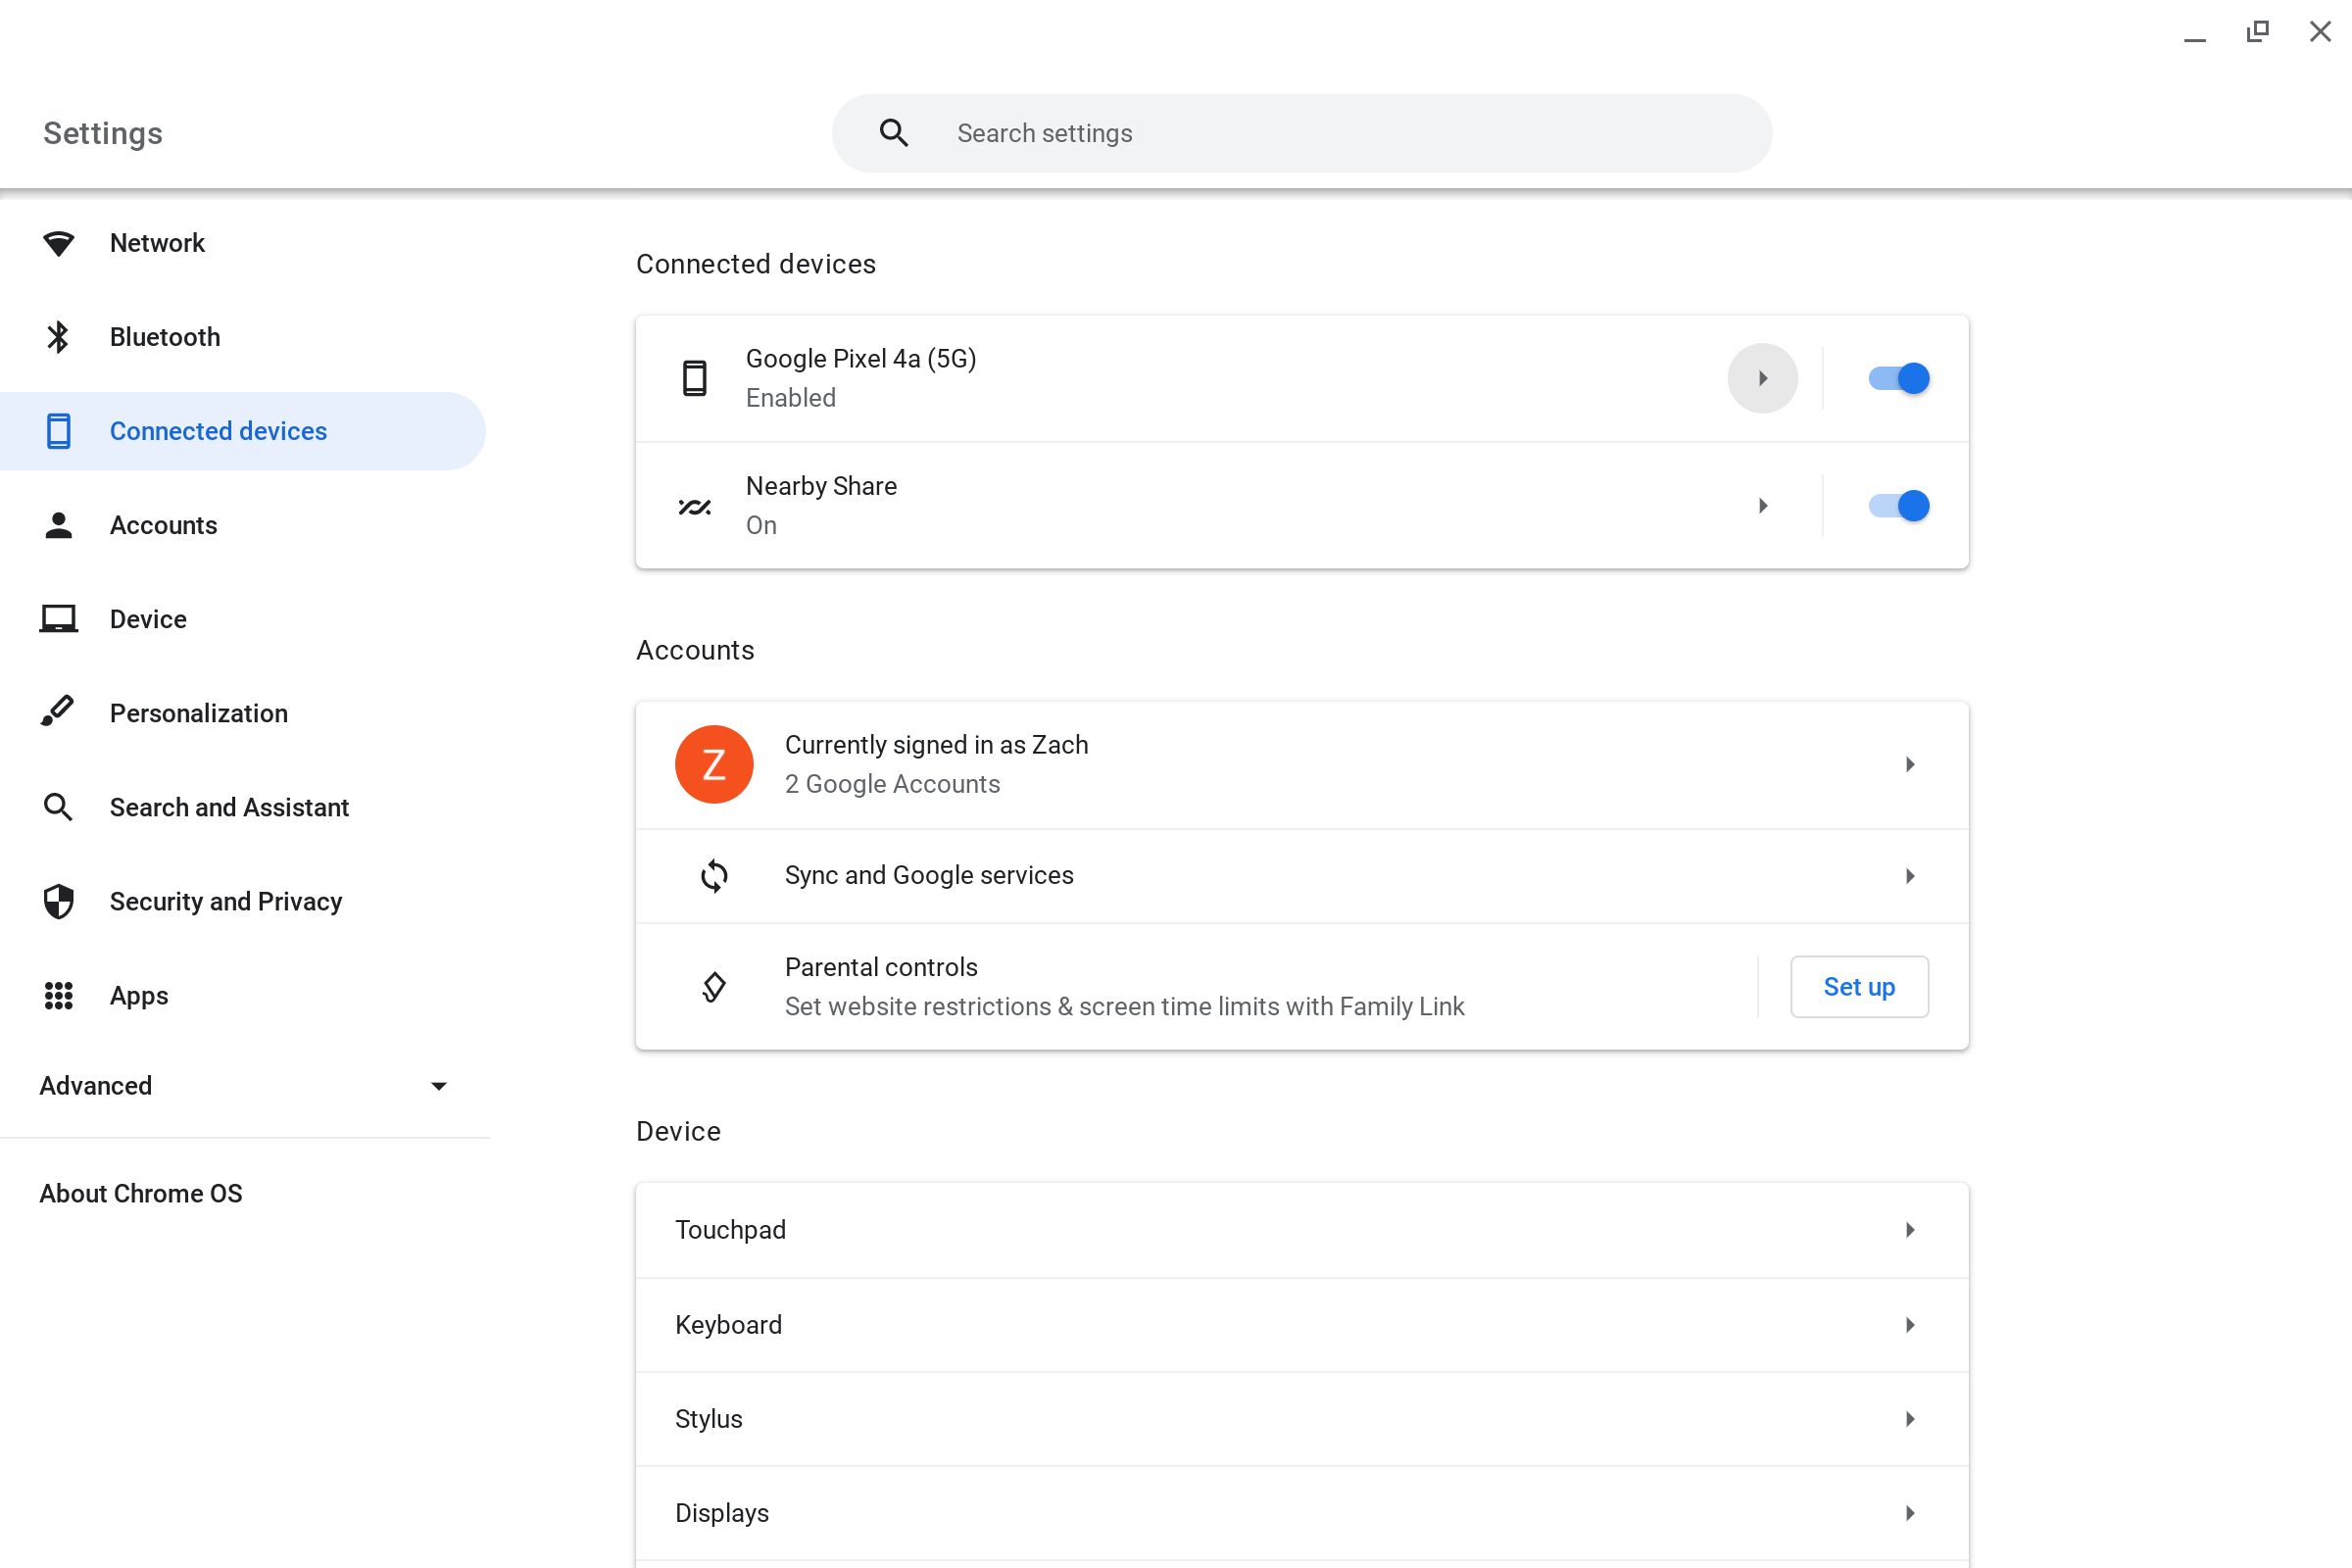 The Connected Devices section of the Chromebook Settings app